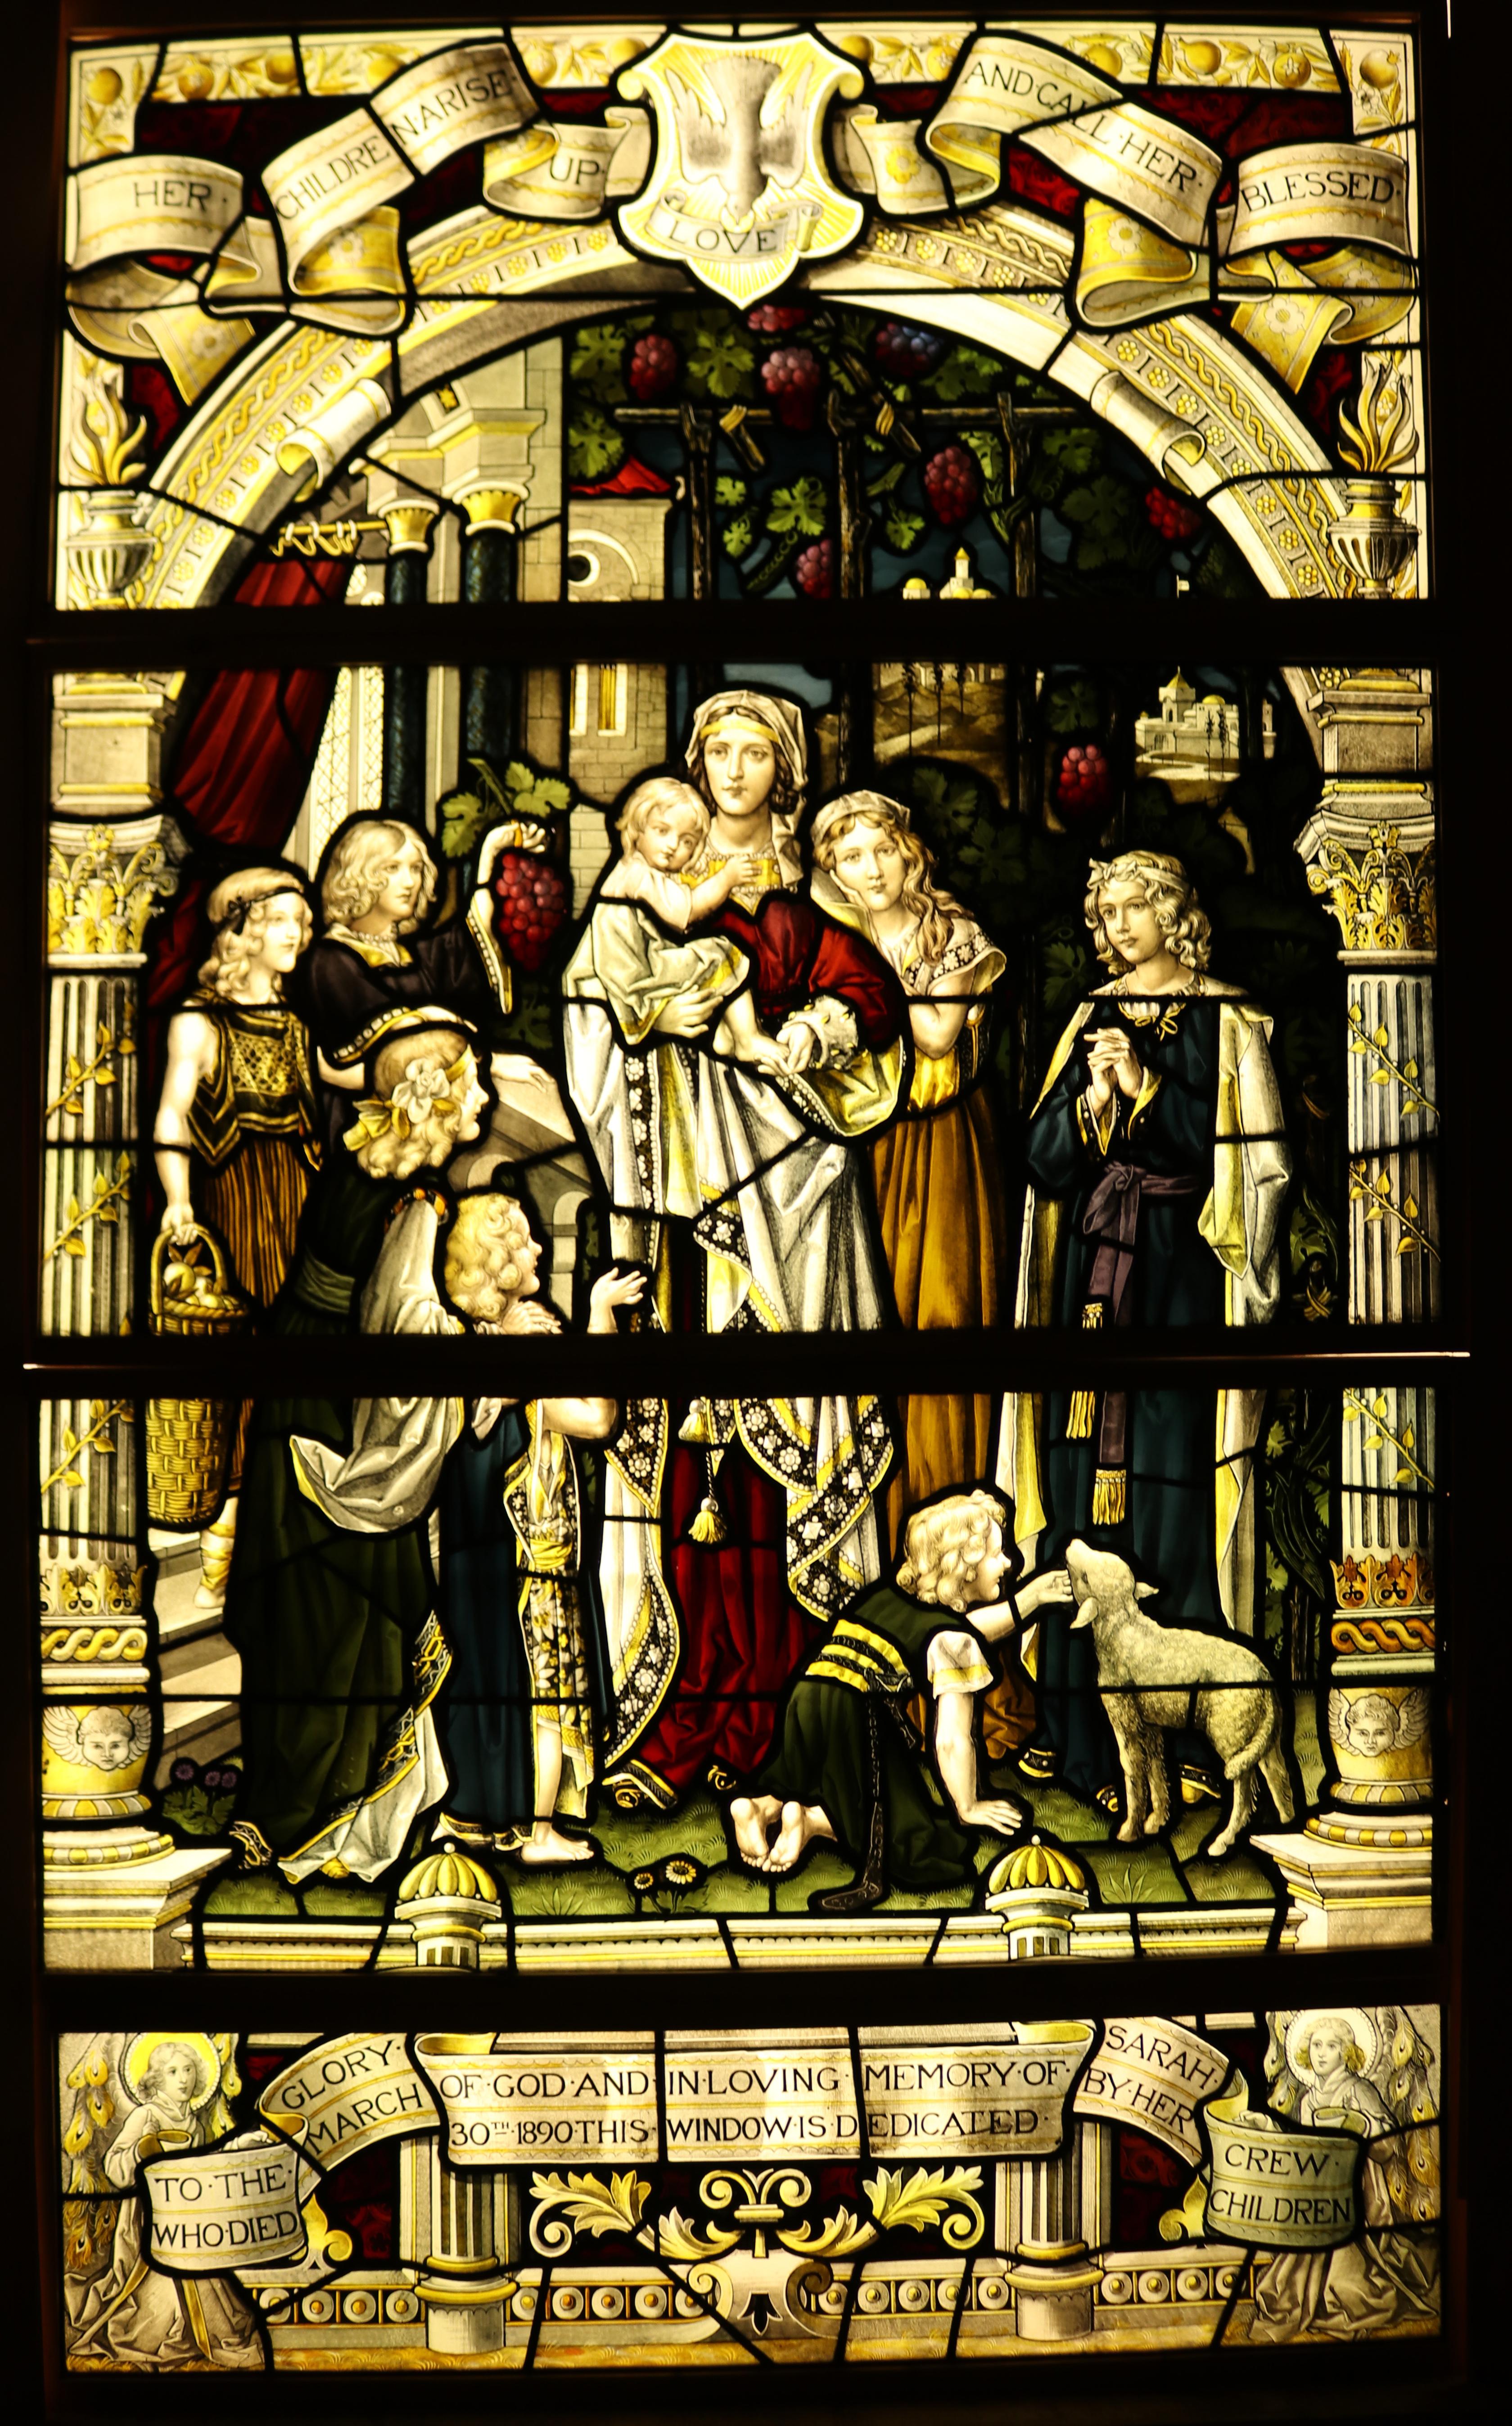 Signed; Cox Sons Buckley and Co, London 1900.

Inscription; 'Her children arise up love and call her blessed, to the glory of god and in loving memory of Sarah Crew who died March 30th 1890 this window is dedicated by her children.'

A stained